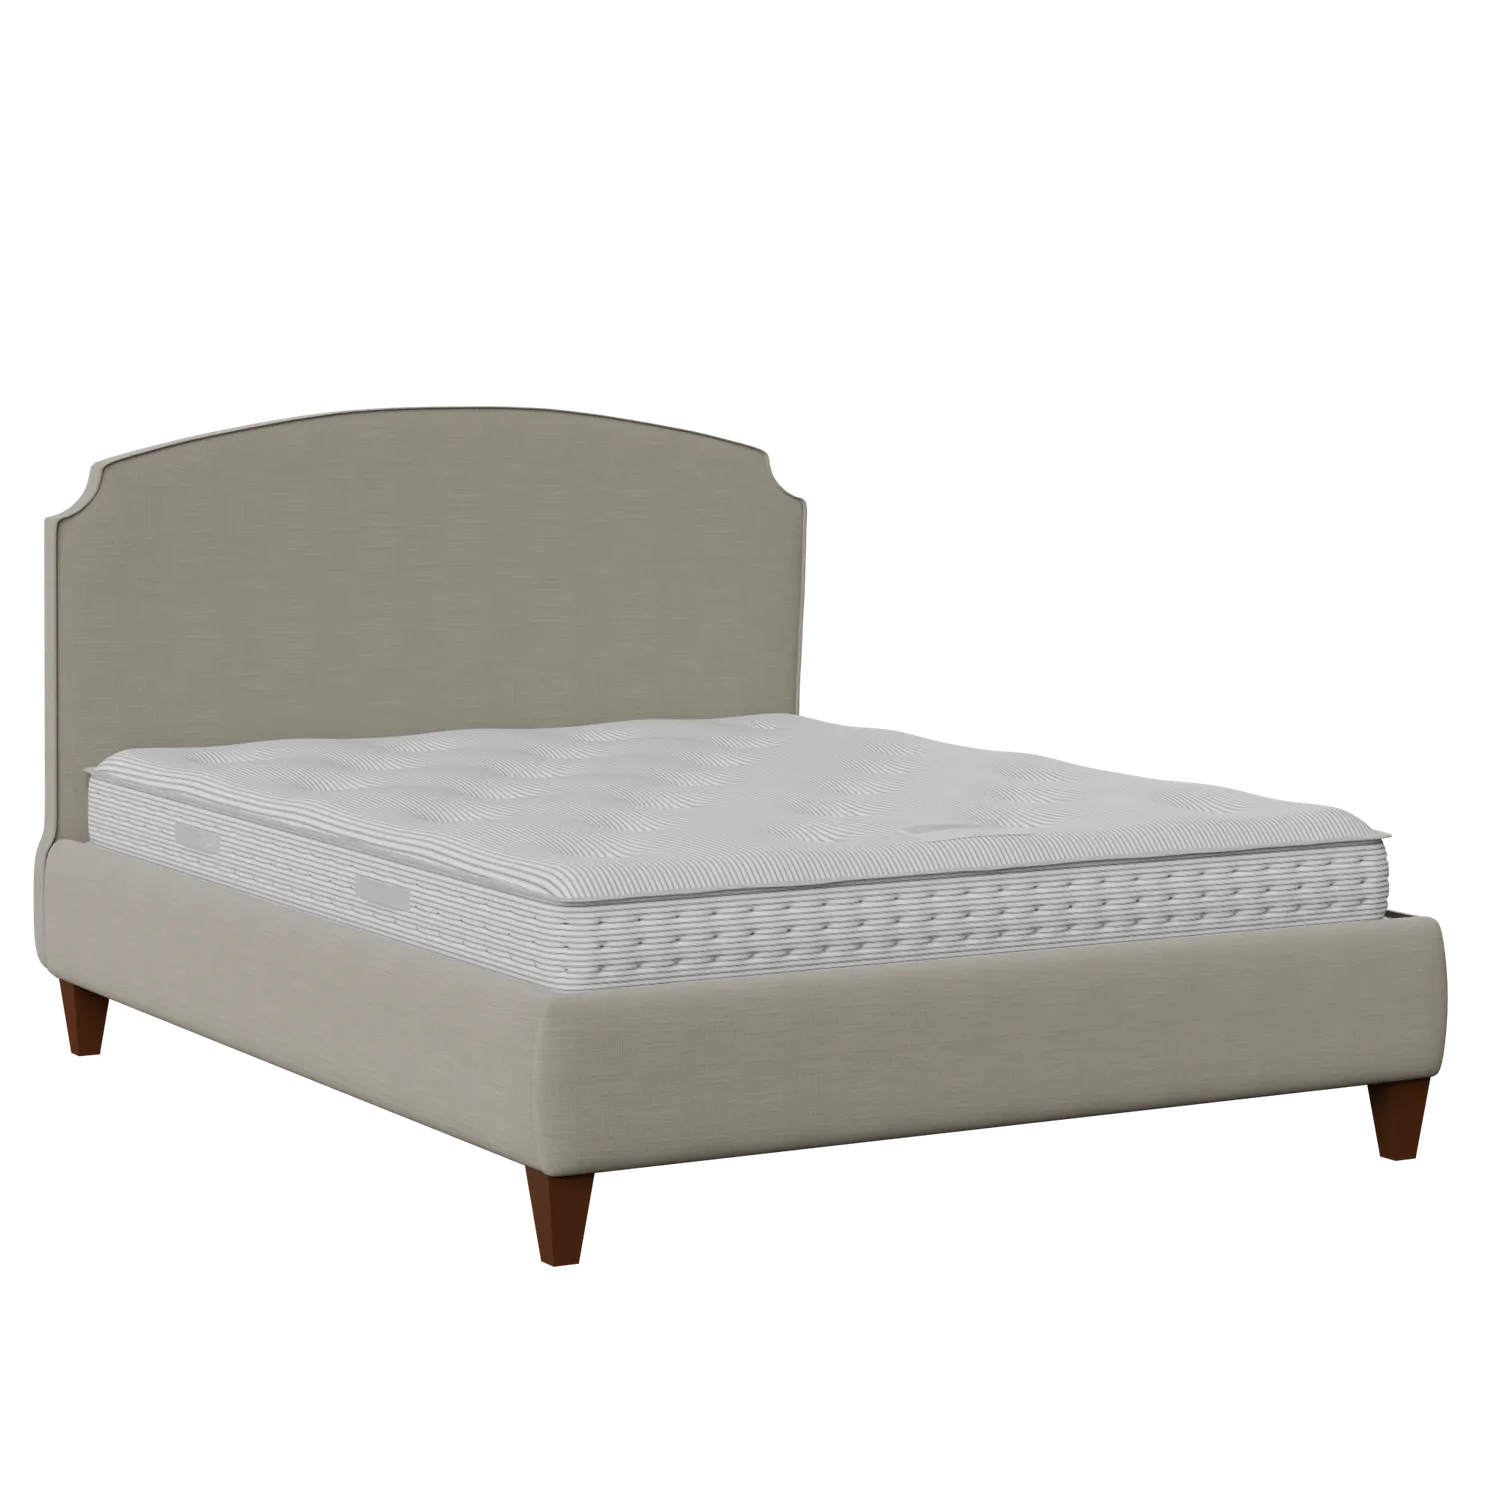 Lide with Piping upholstered bed in grey fabric